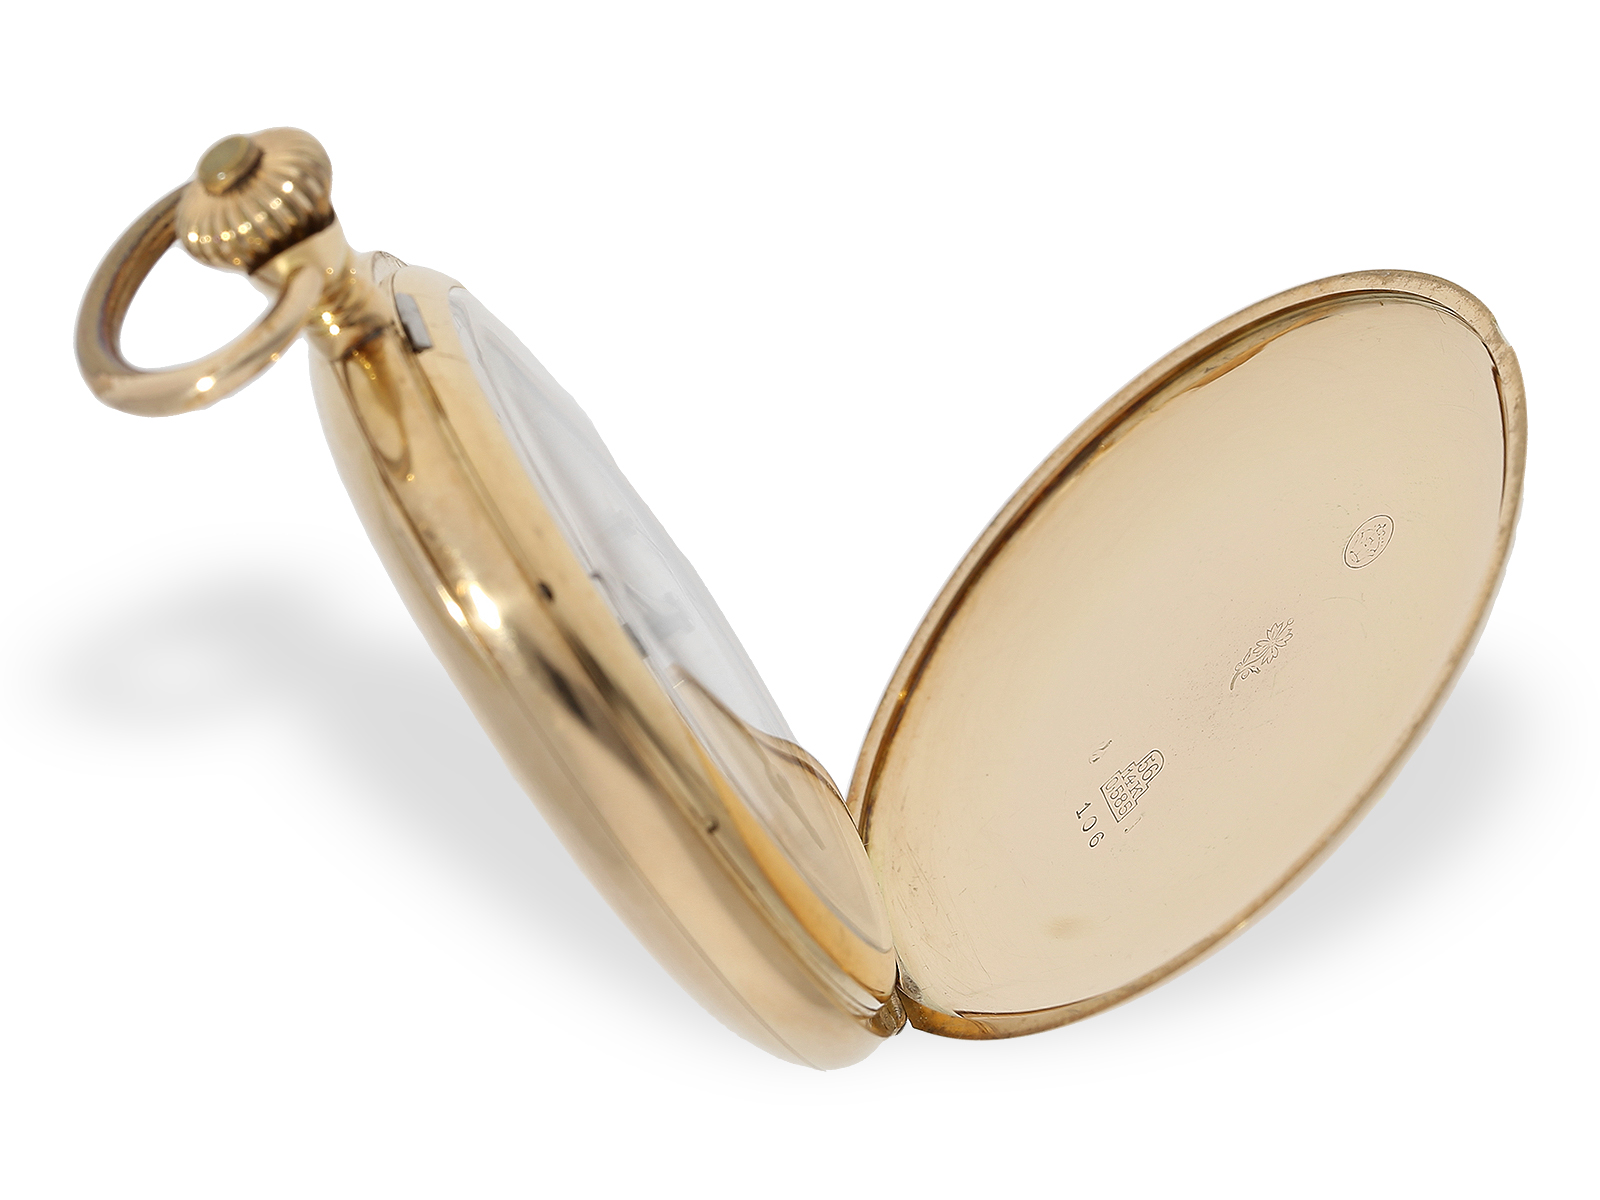 Pocket watch: fine gold hunting case watch, signed Girard Perregaux No. 429106, ca. 1910 - Image 5 of 7